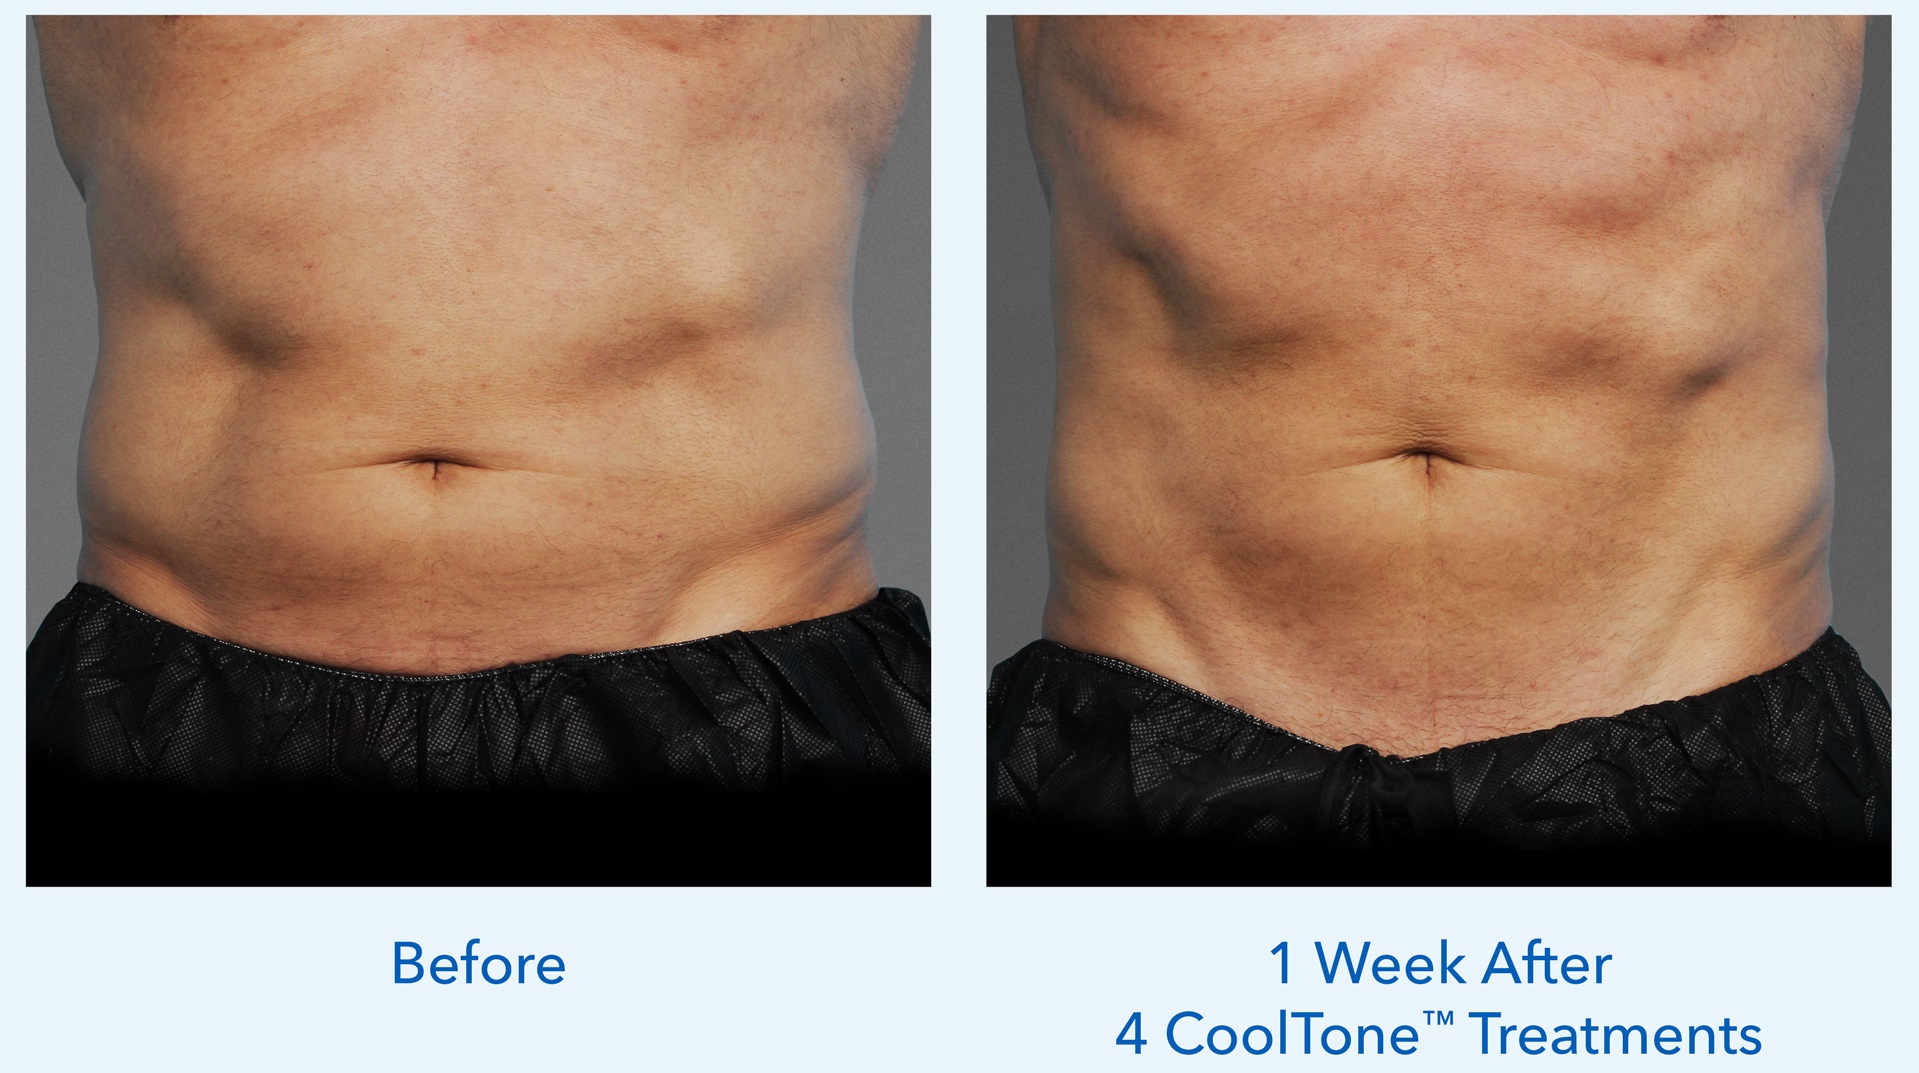 Before and After CoolTone™ Treatments